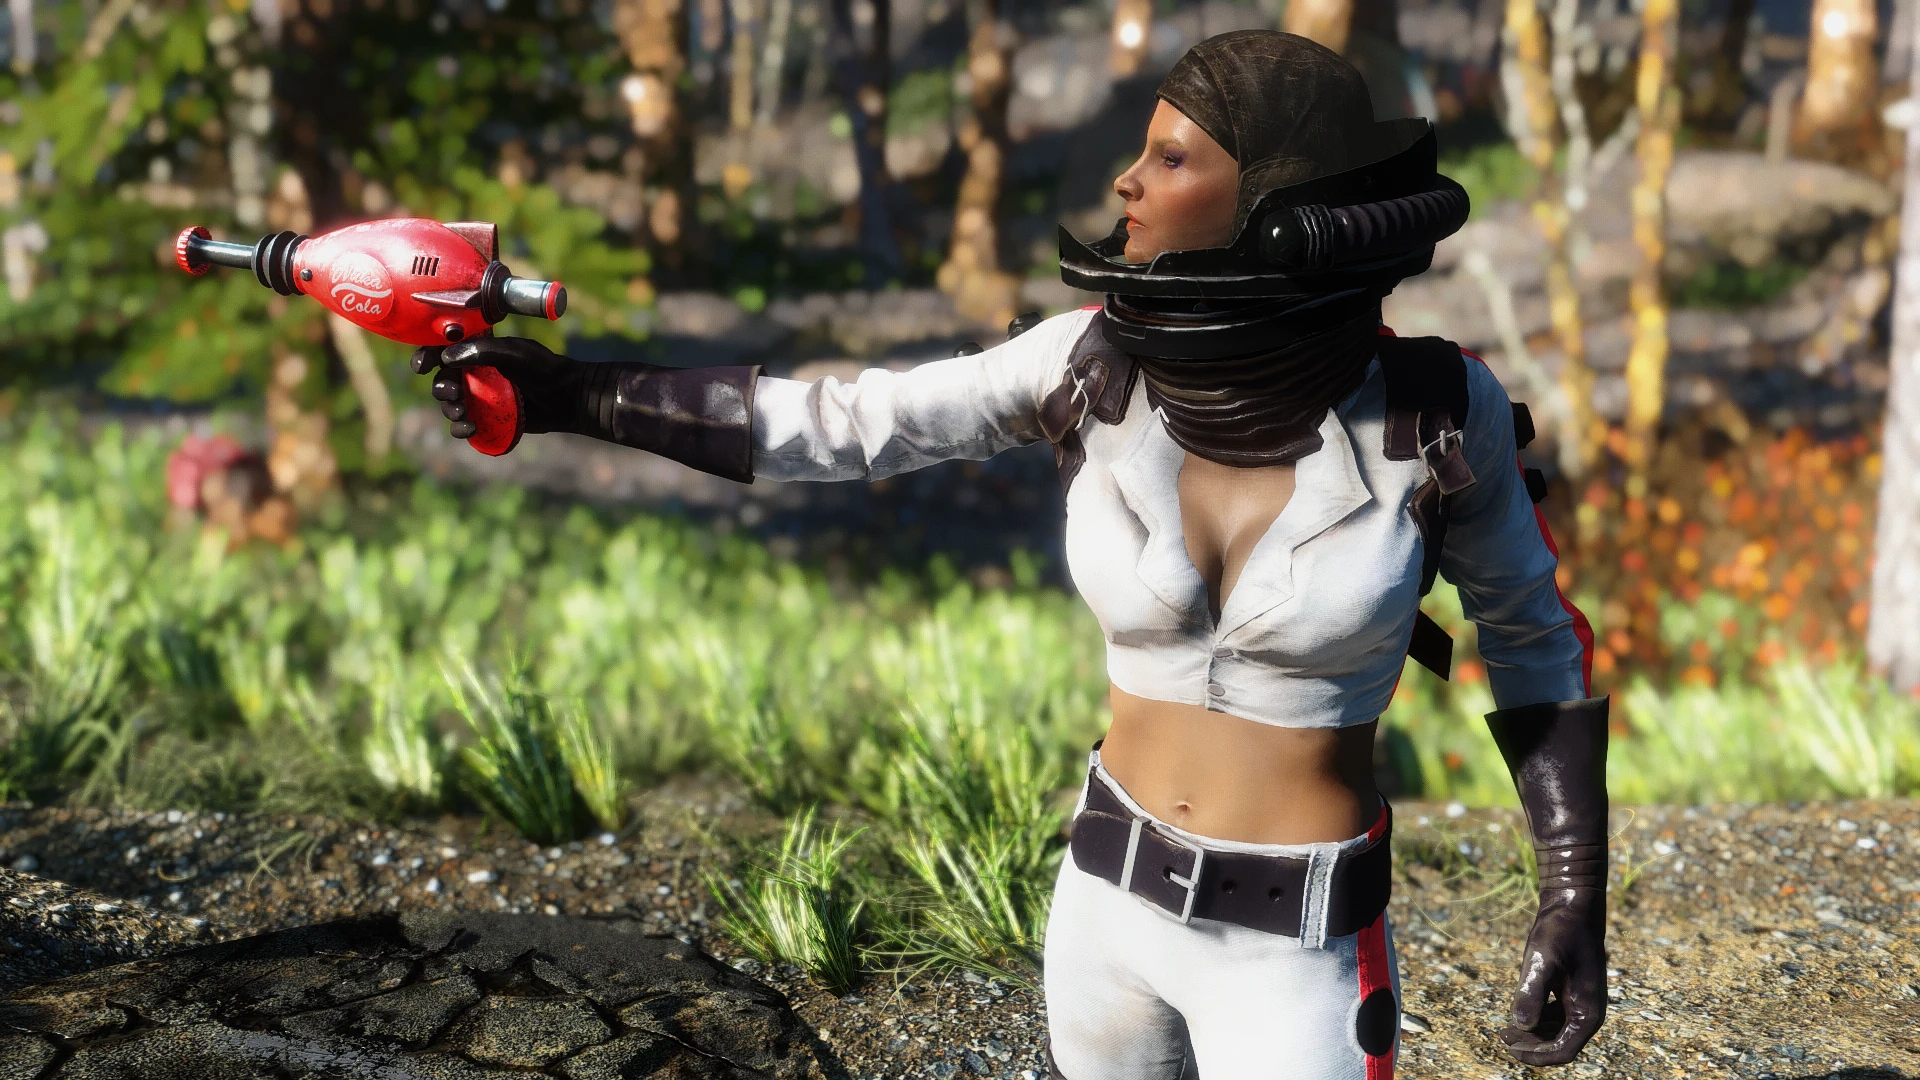 Improved Nuka Girl Rocketsuit Cbbe Bodyslide At Fallout 4 Nexus Mods And Community